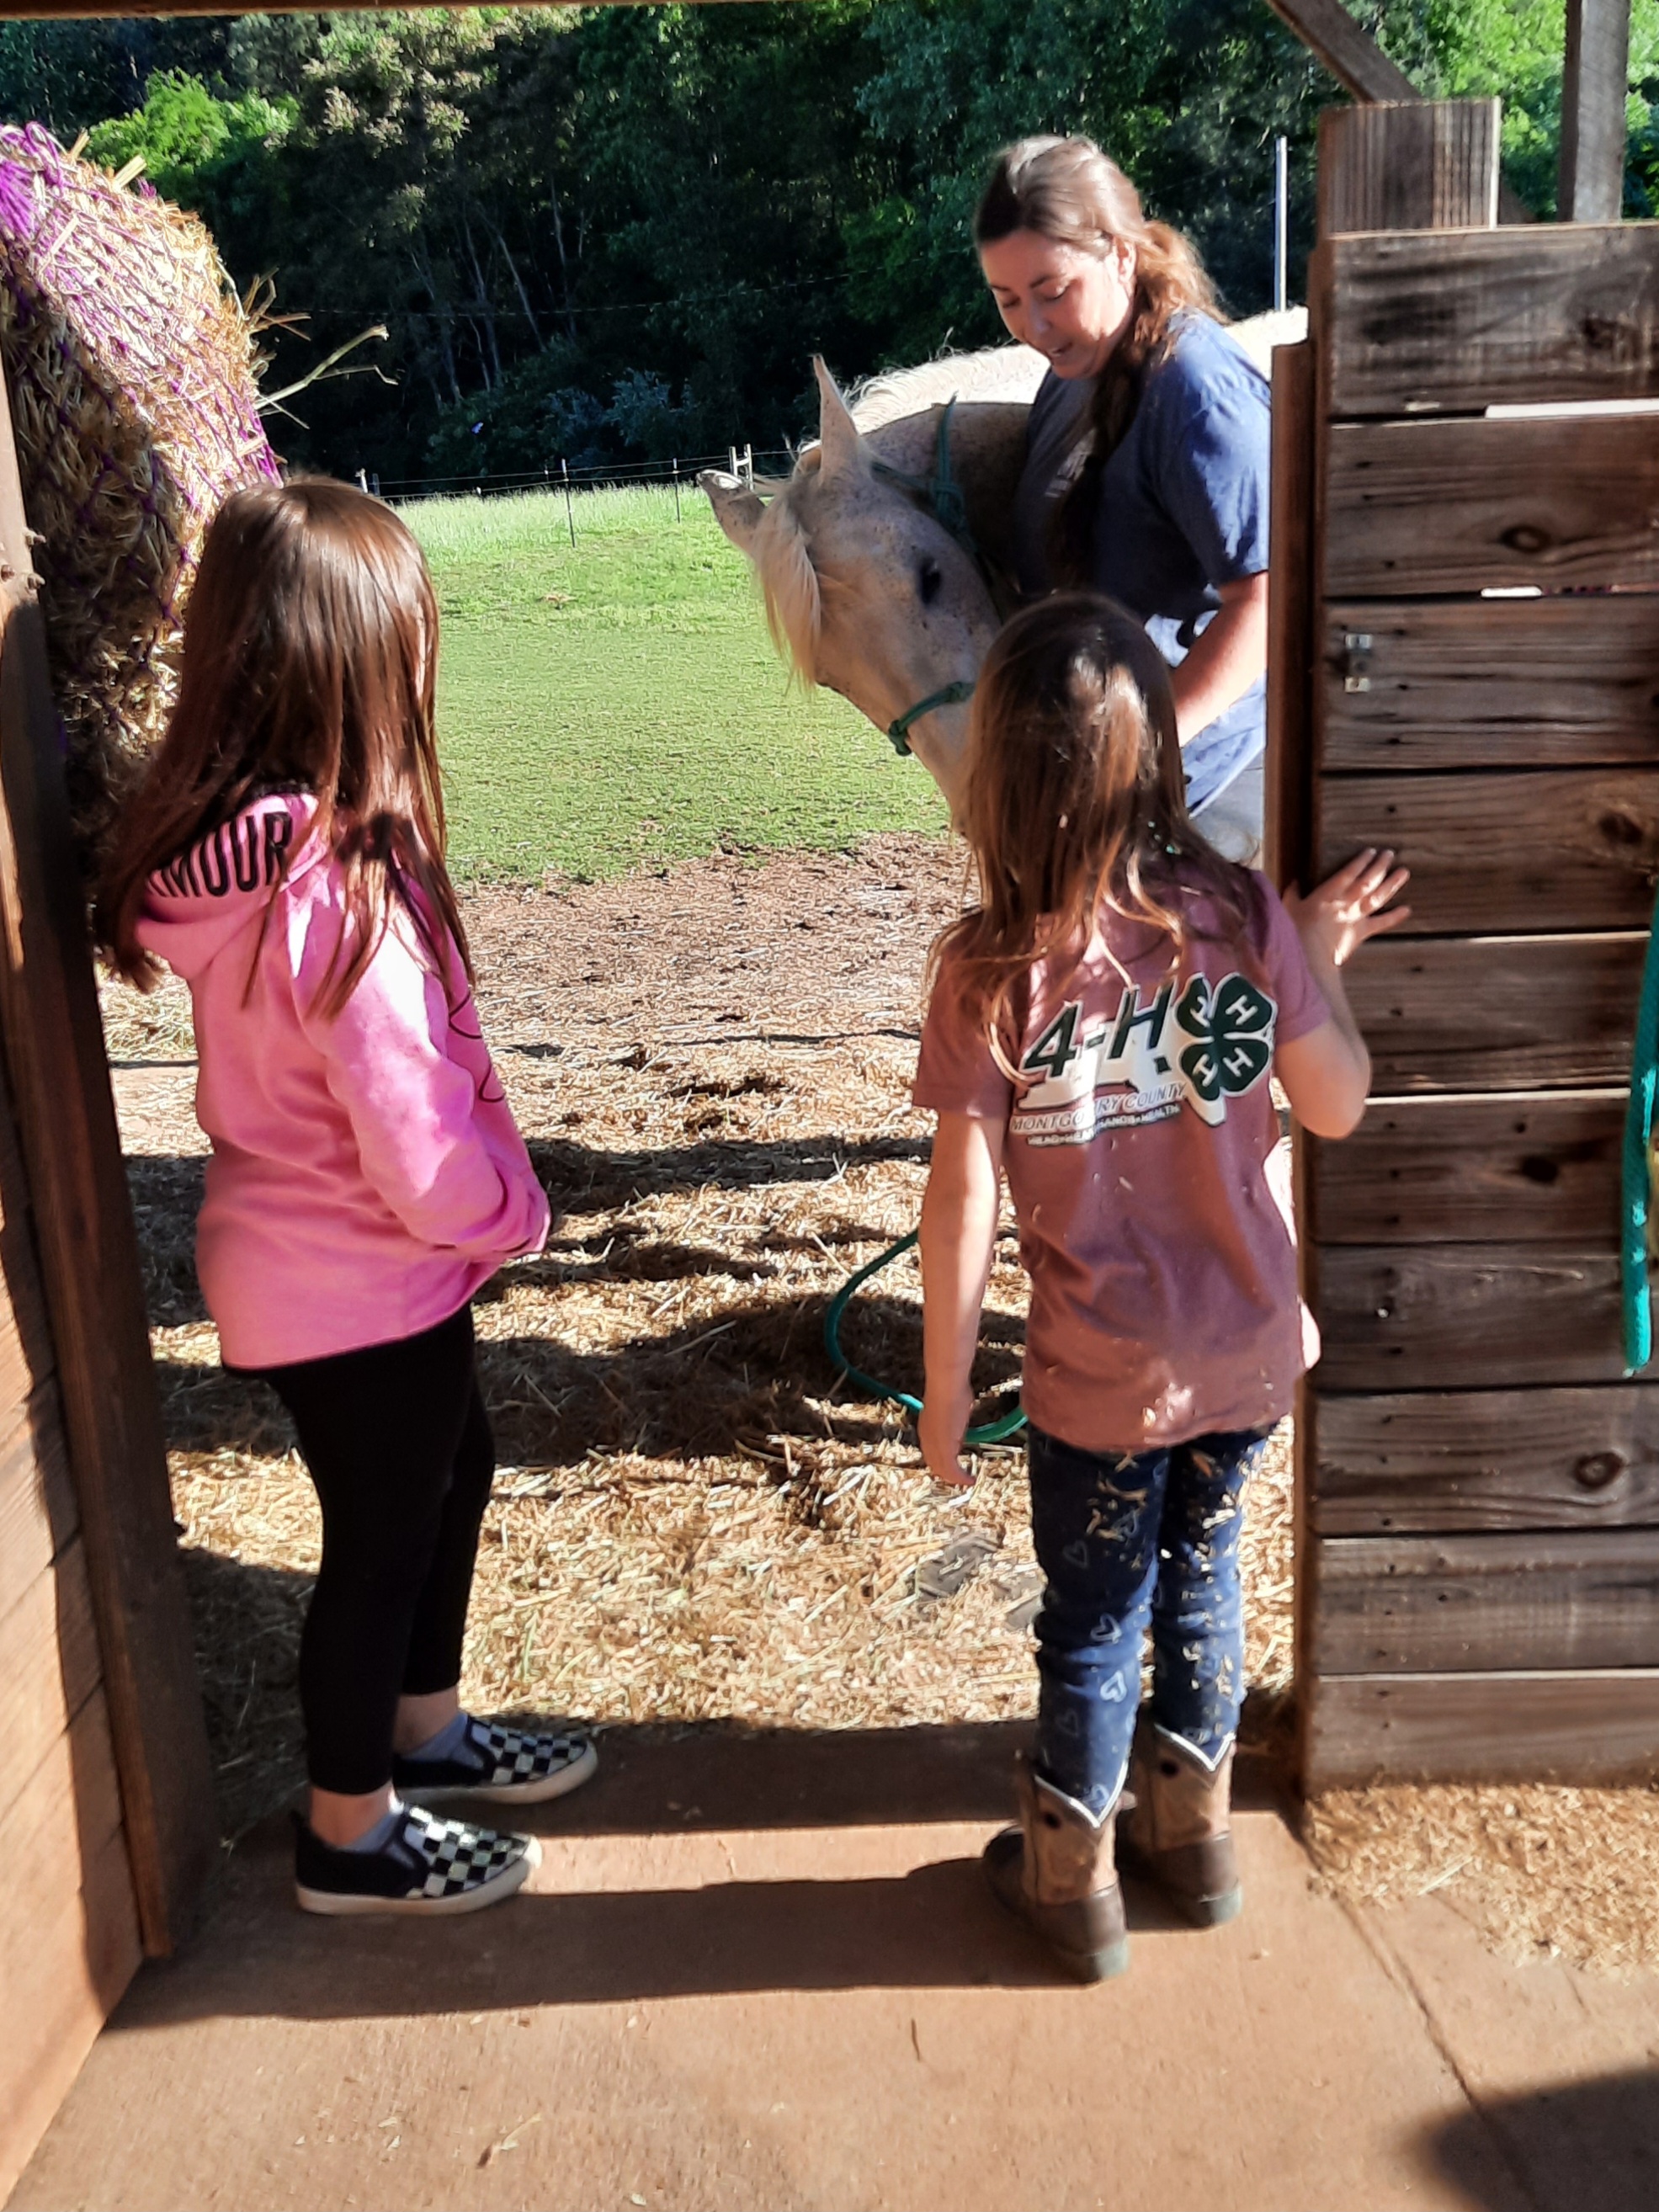 A woman introduces a horse to two young girls.